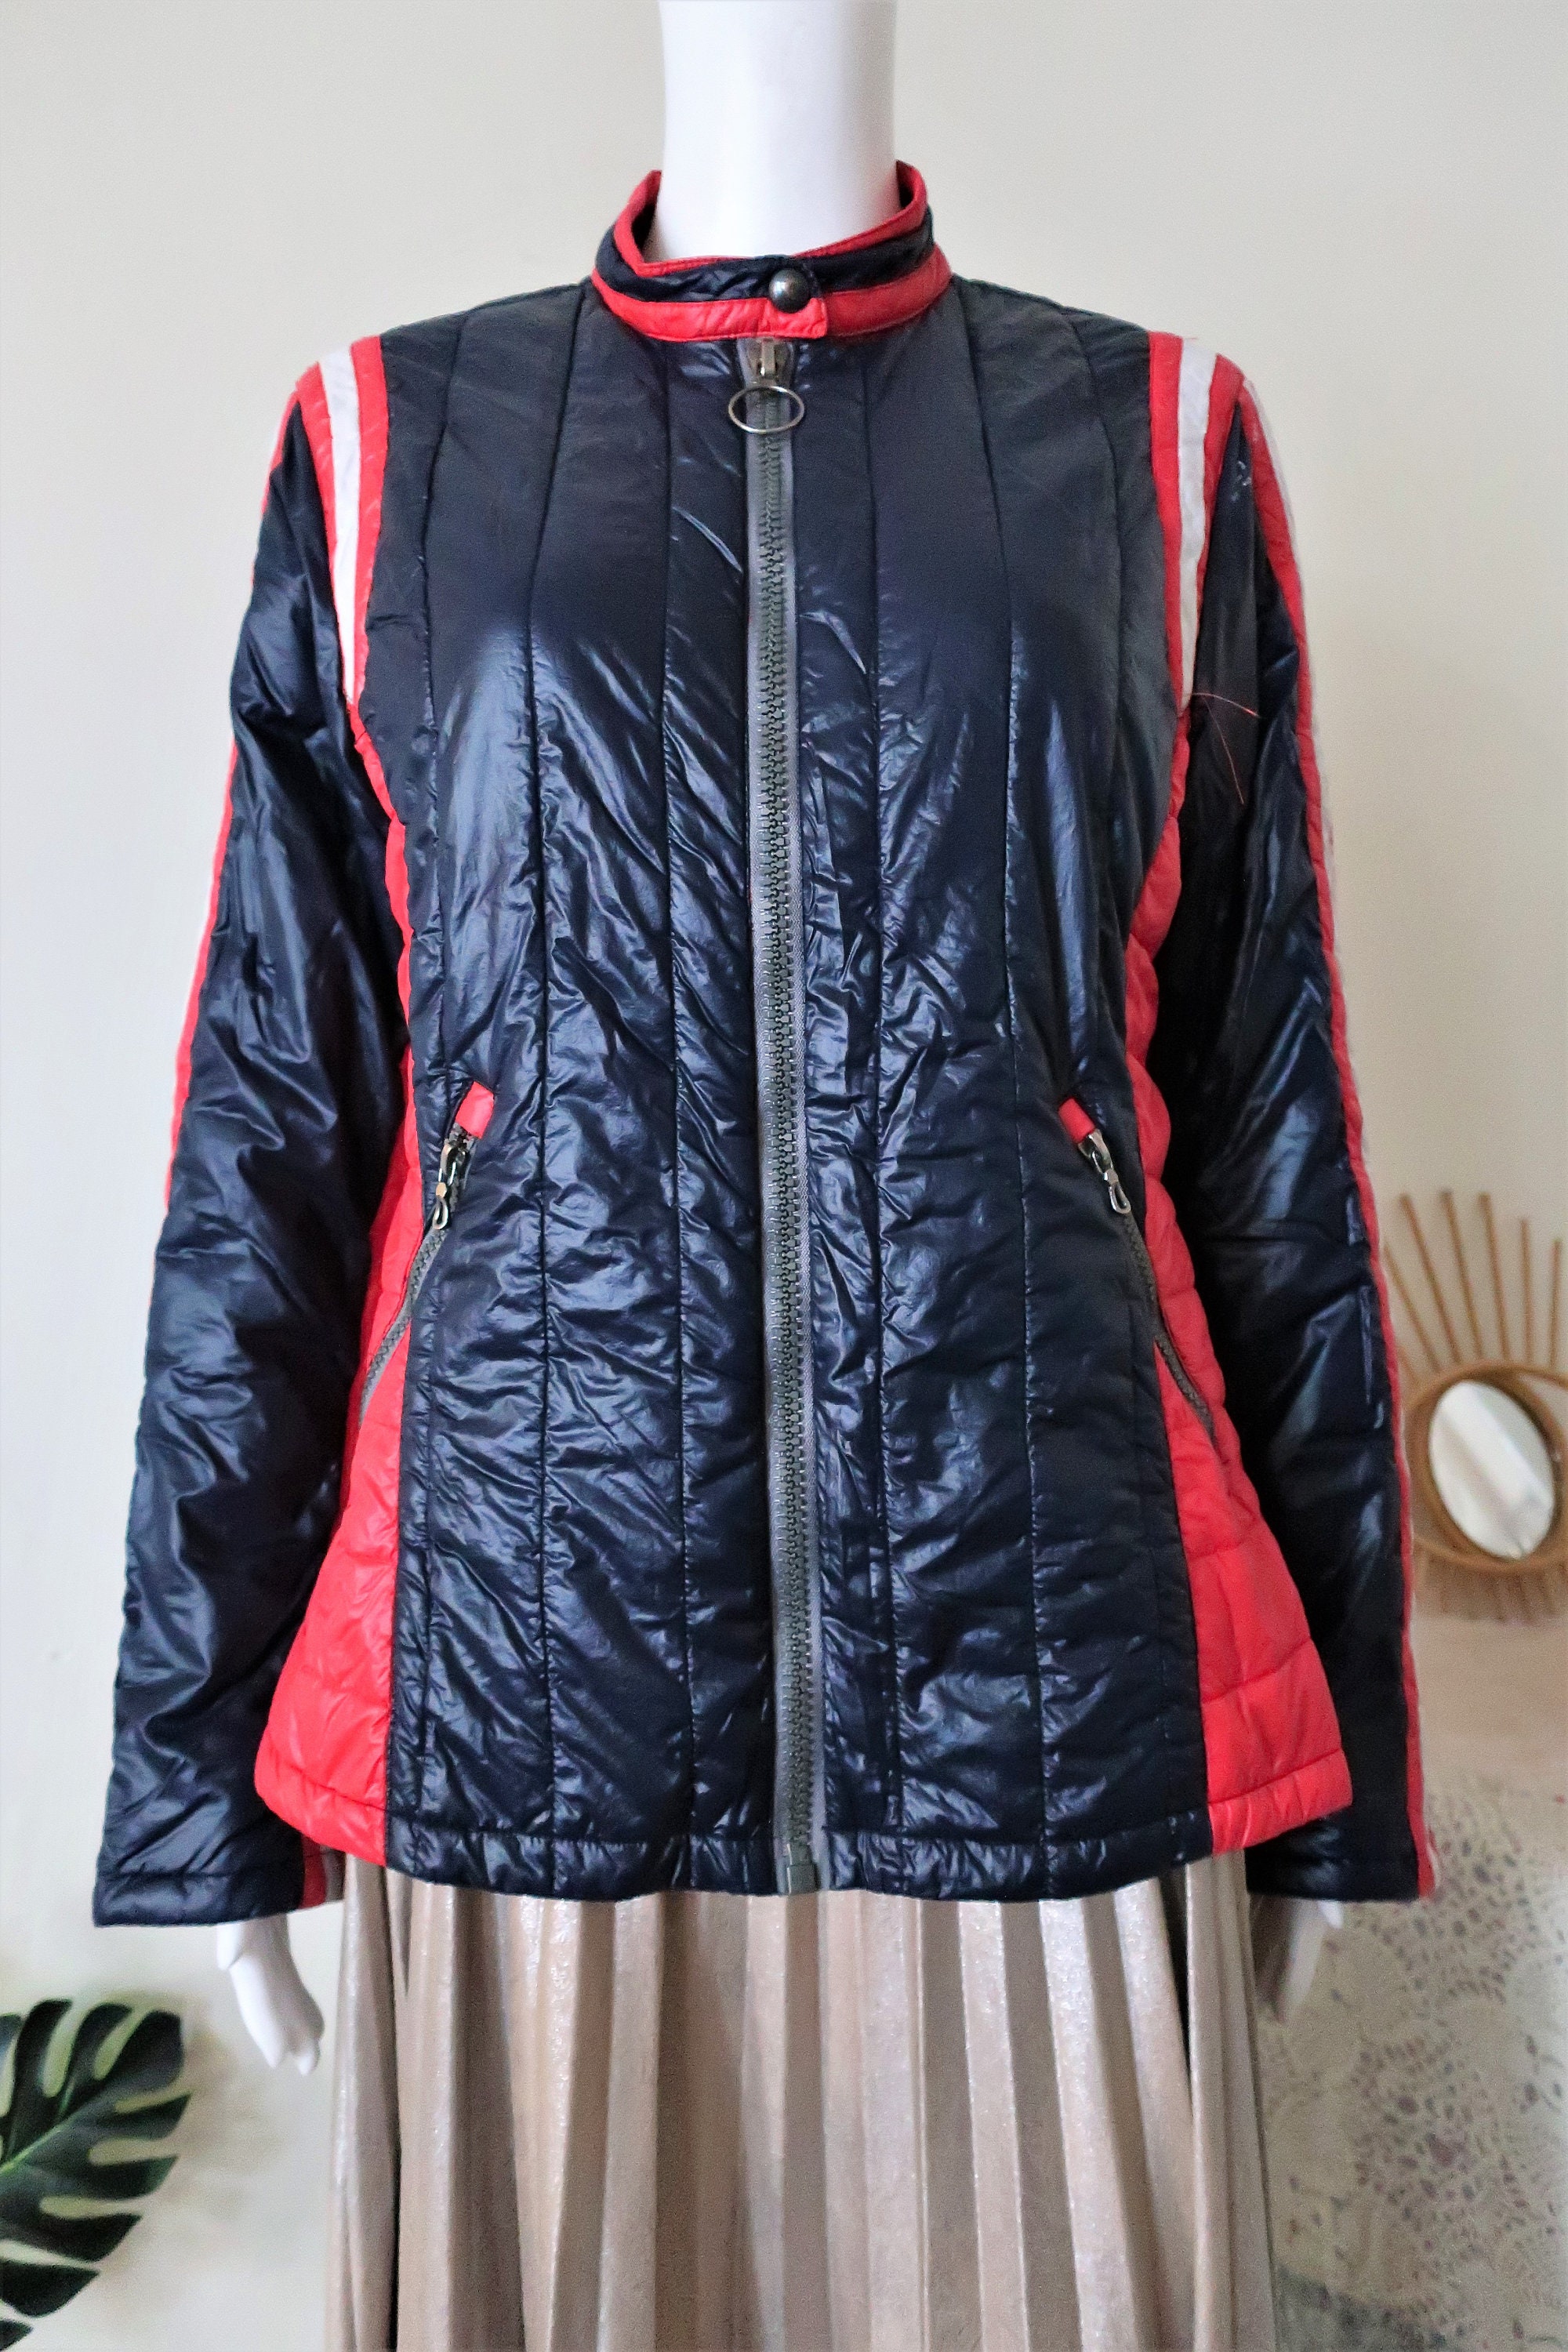 Glossy down jacket with matching lining - Colmar